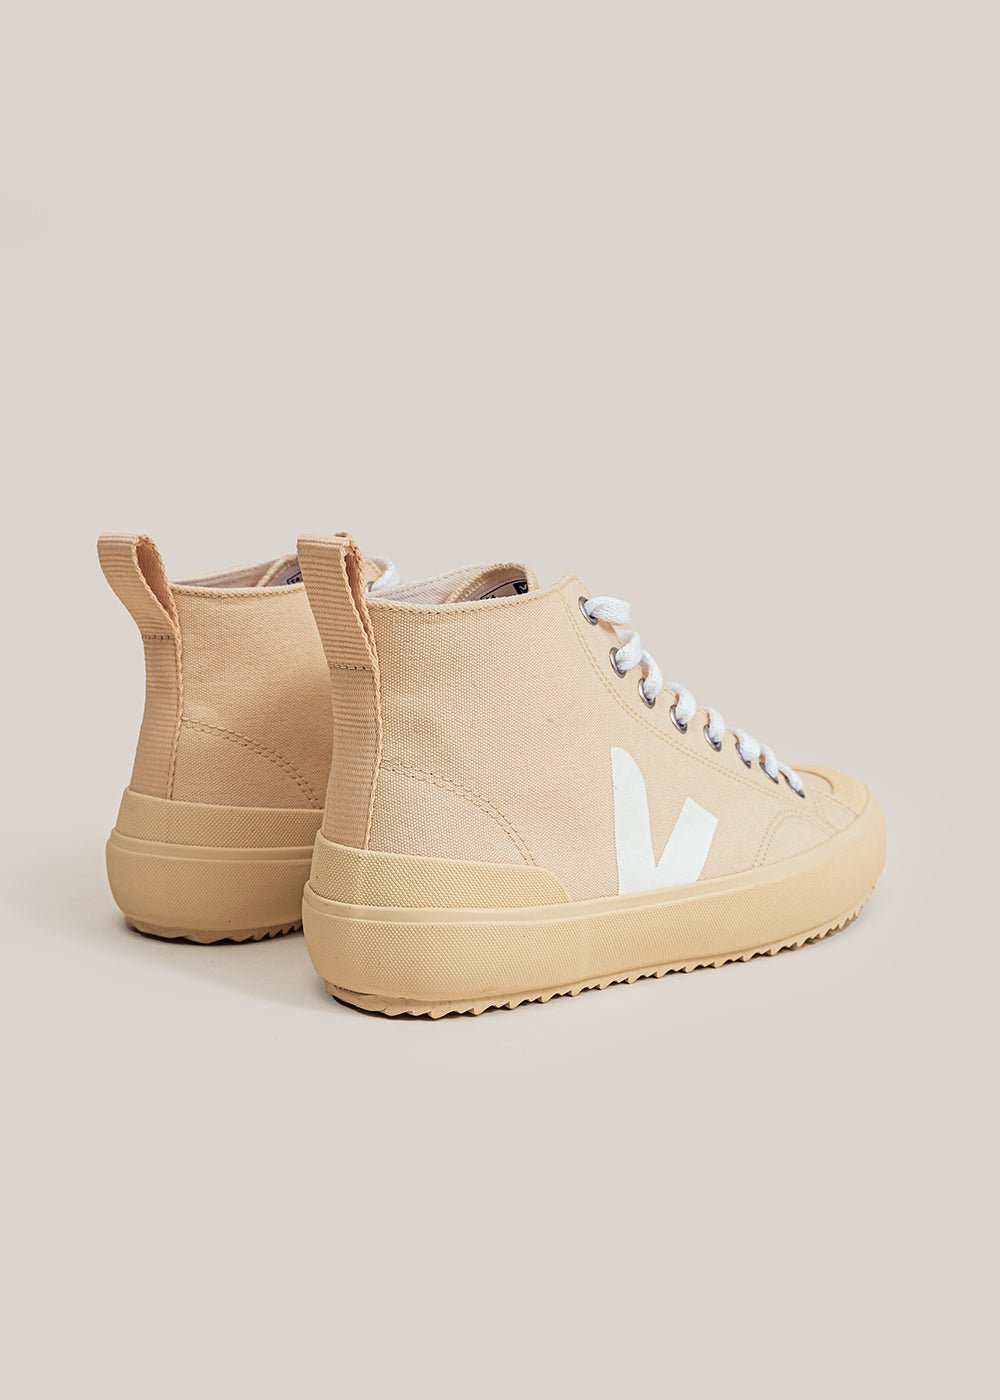 Veja Butter Nova High Sneaker - New Classics Studios Sustainable Ethical Fashion Canada